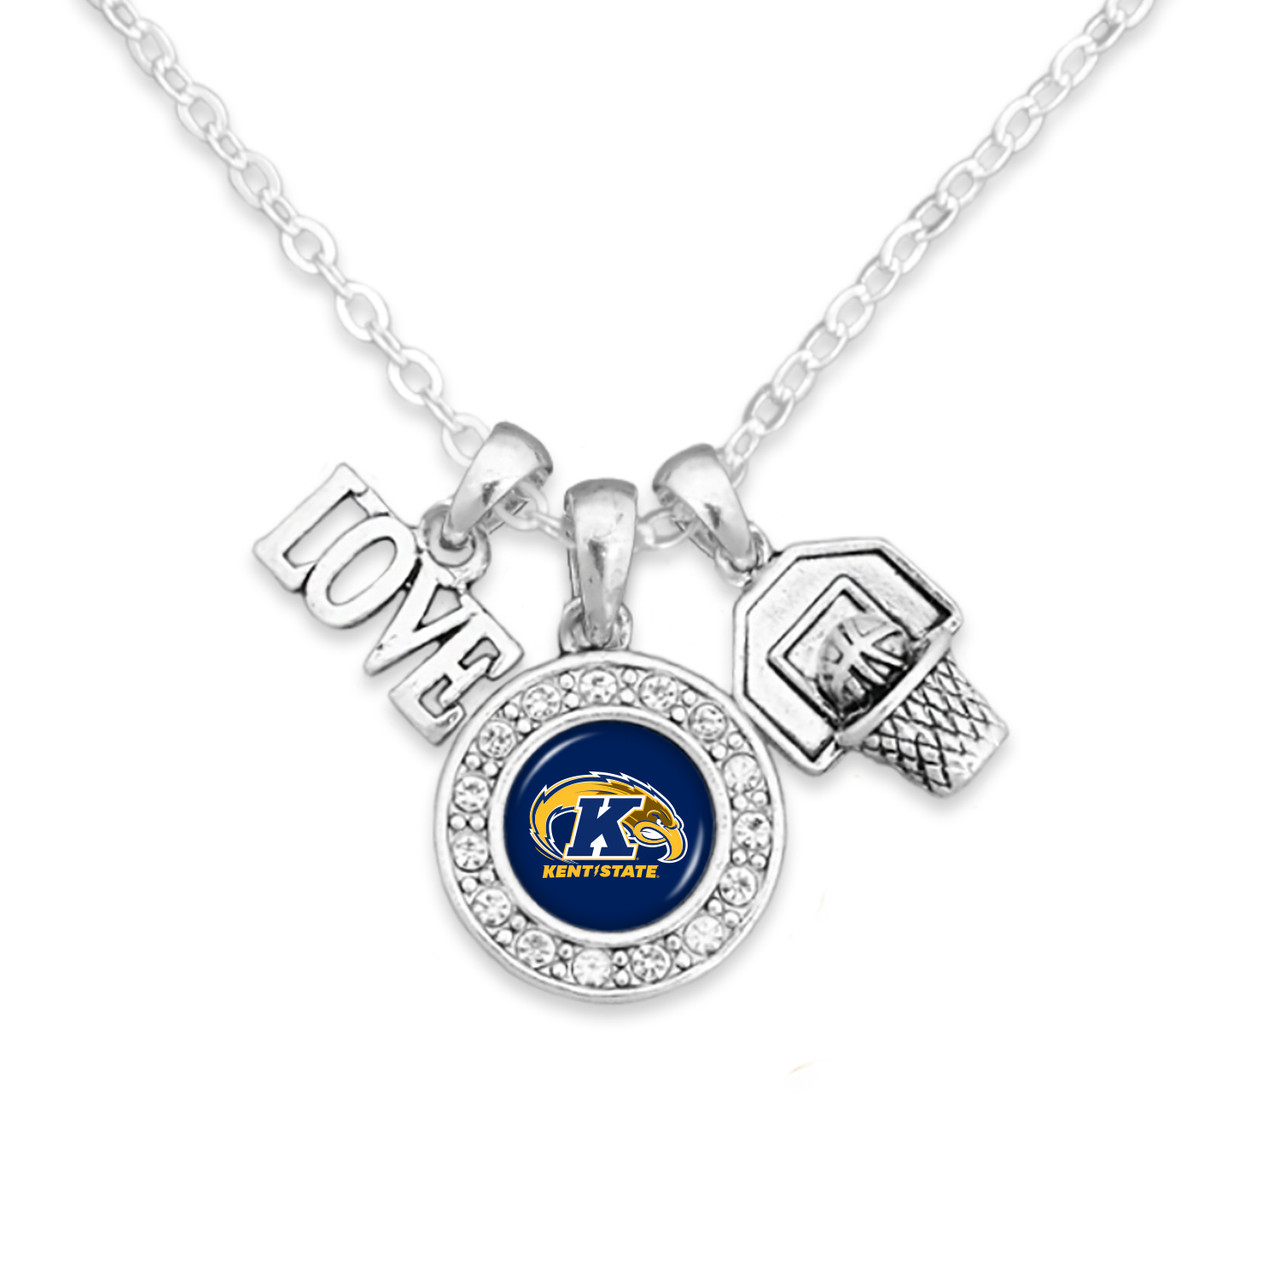 Kent State Golden Flashes Necklace- Basketball, Love and Logo